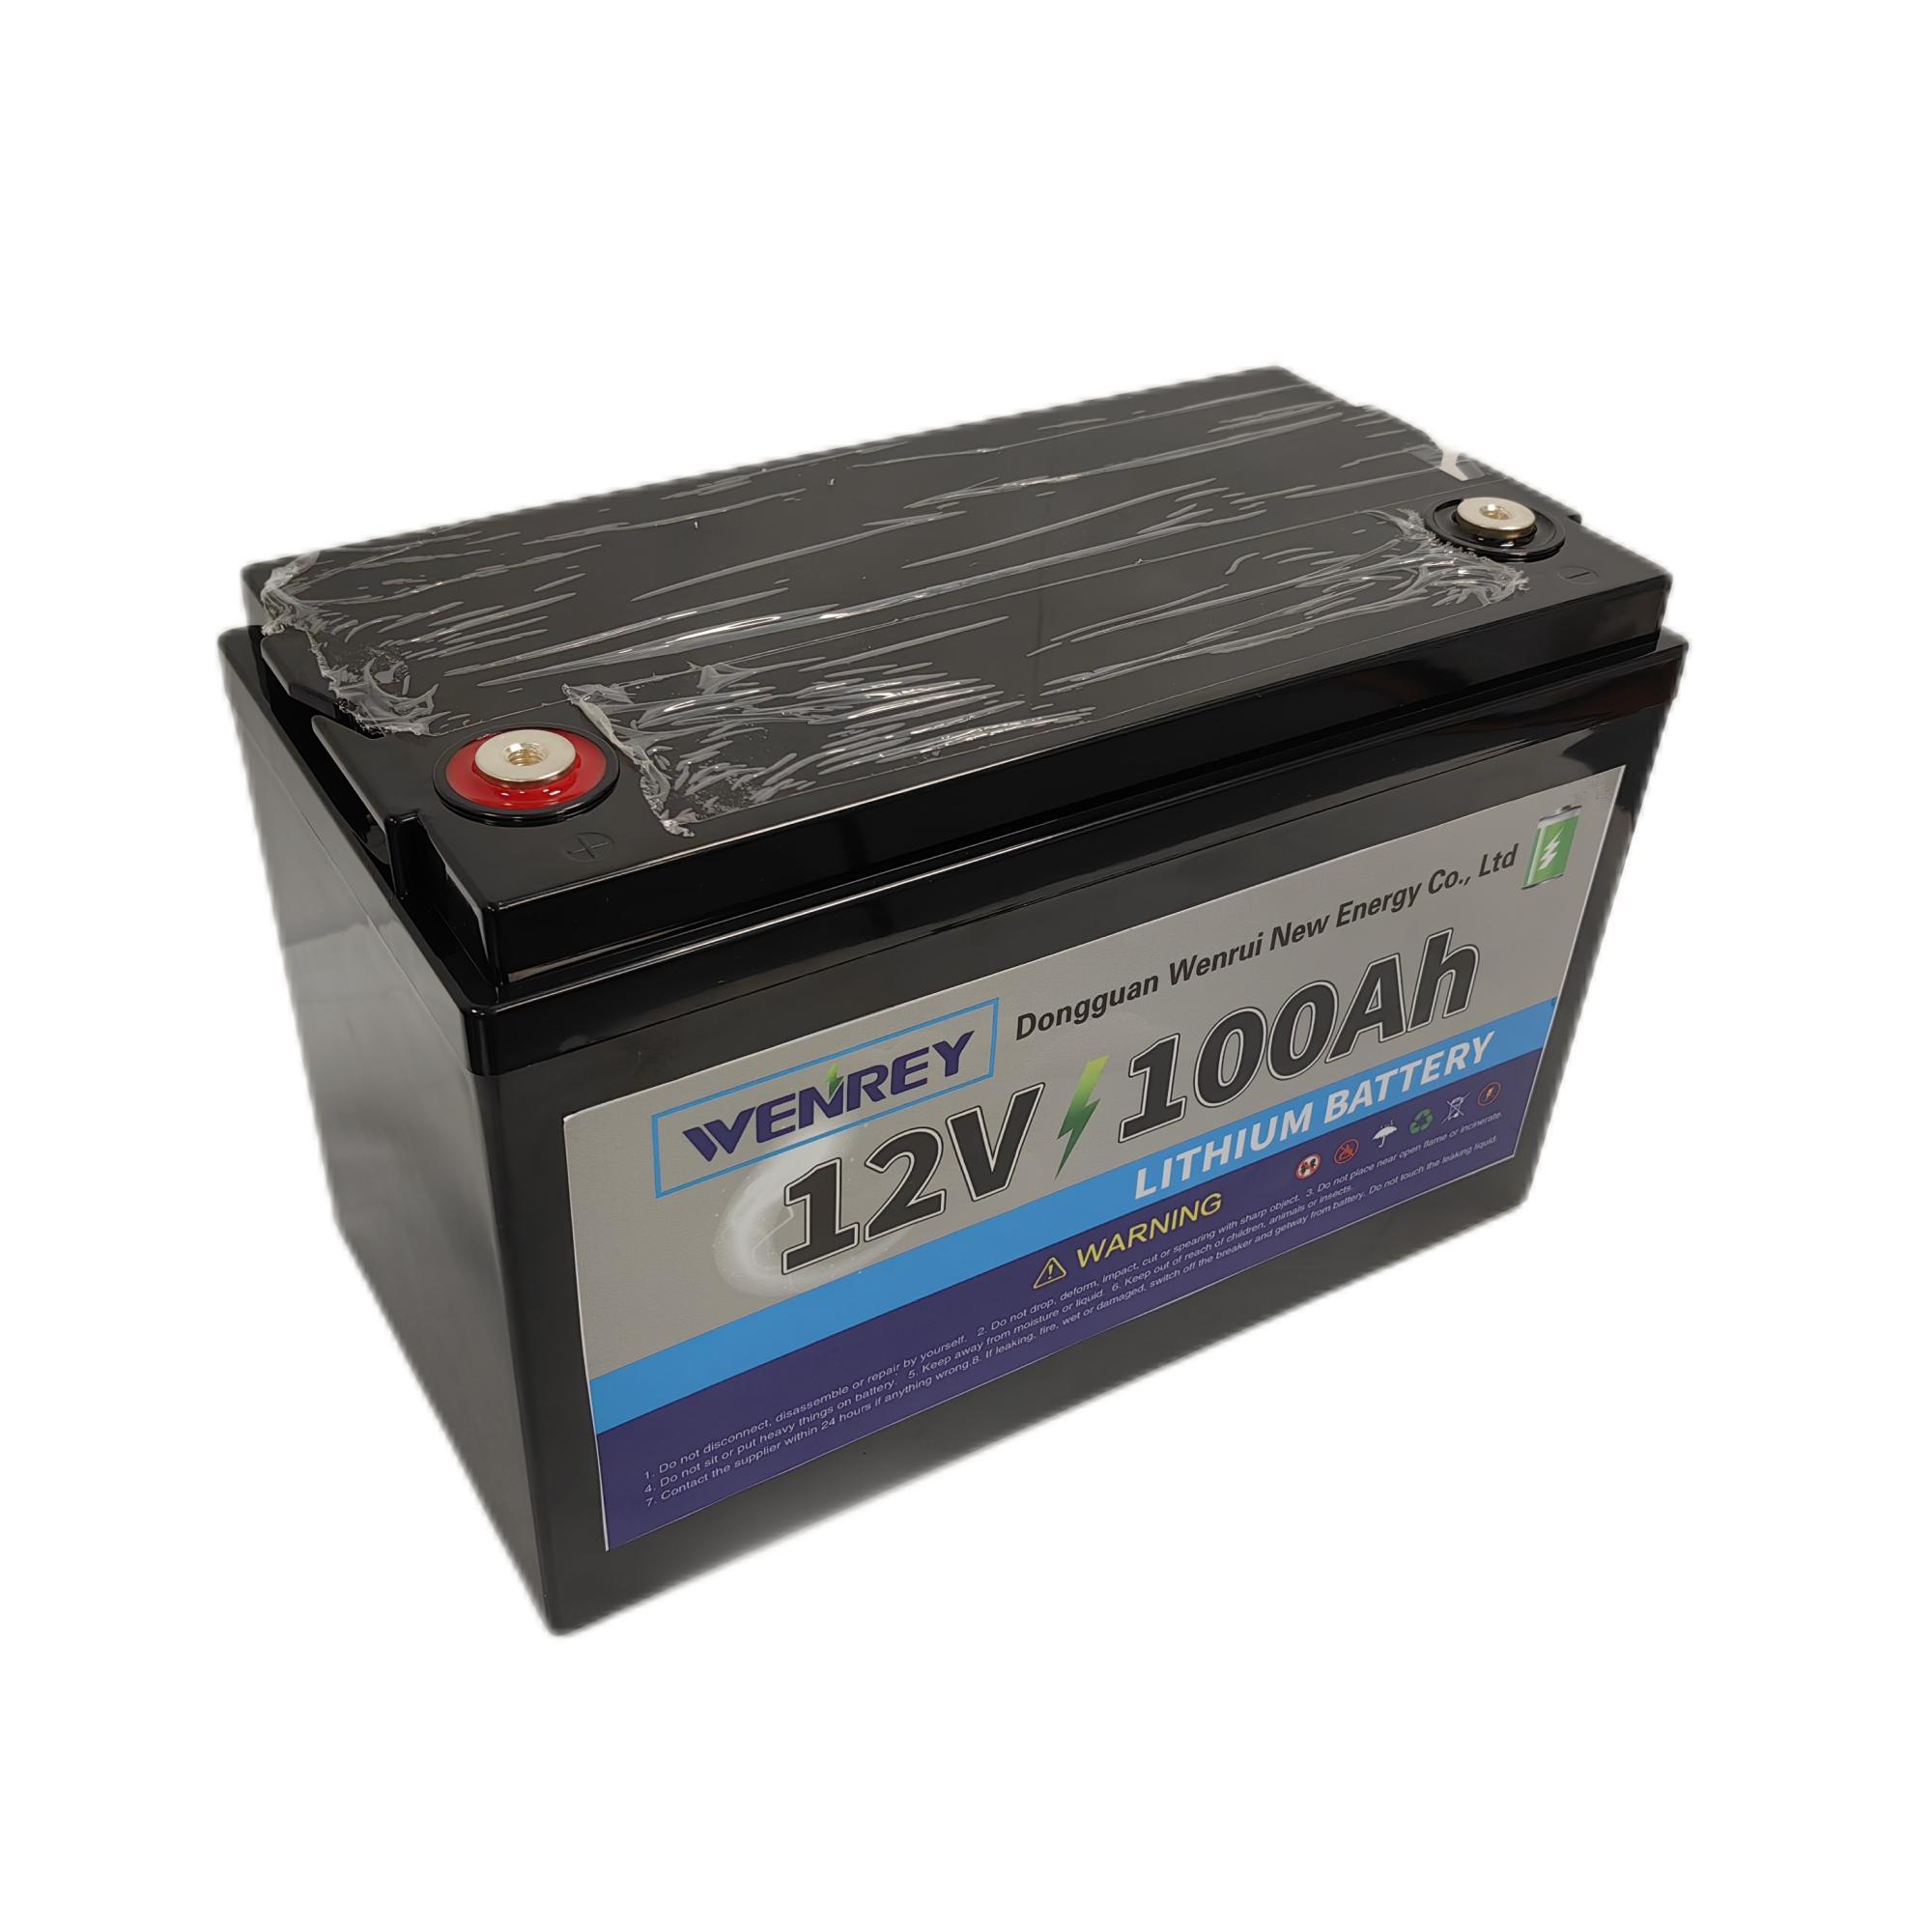 Independent Solar Power for Rvs - 12V 100ah Lithium Battery